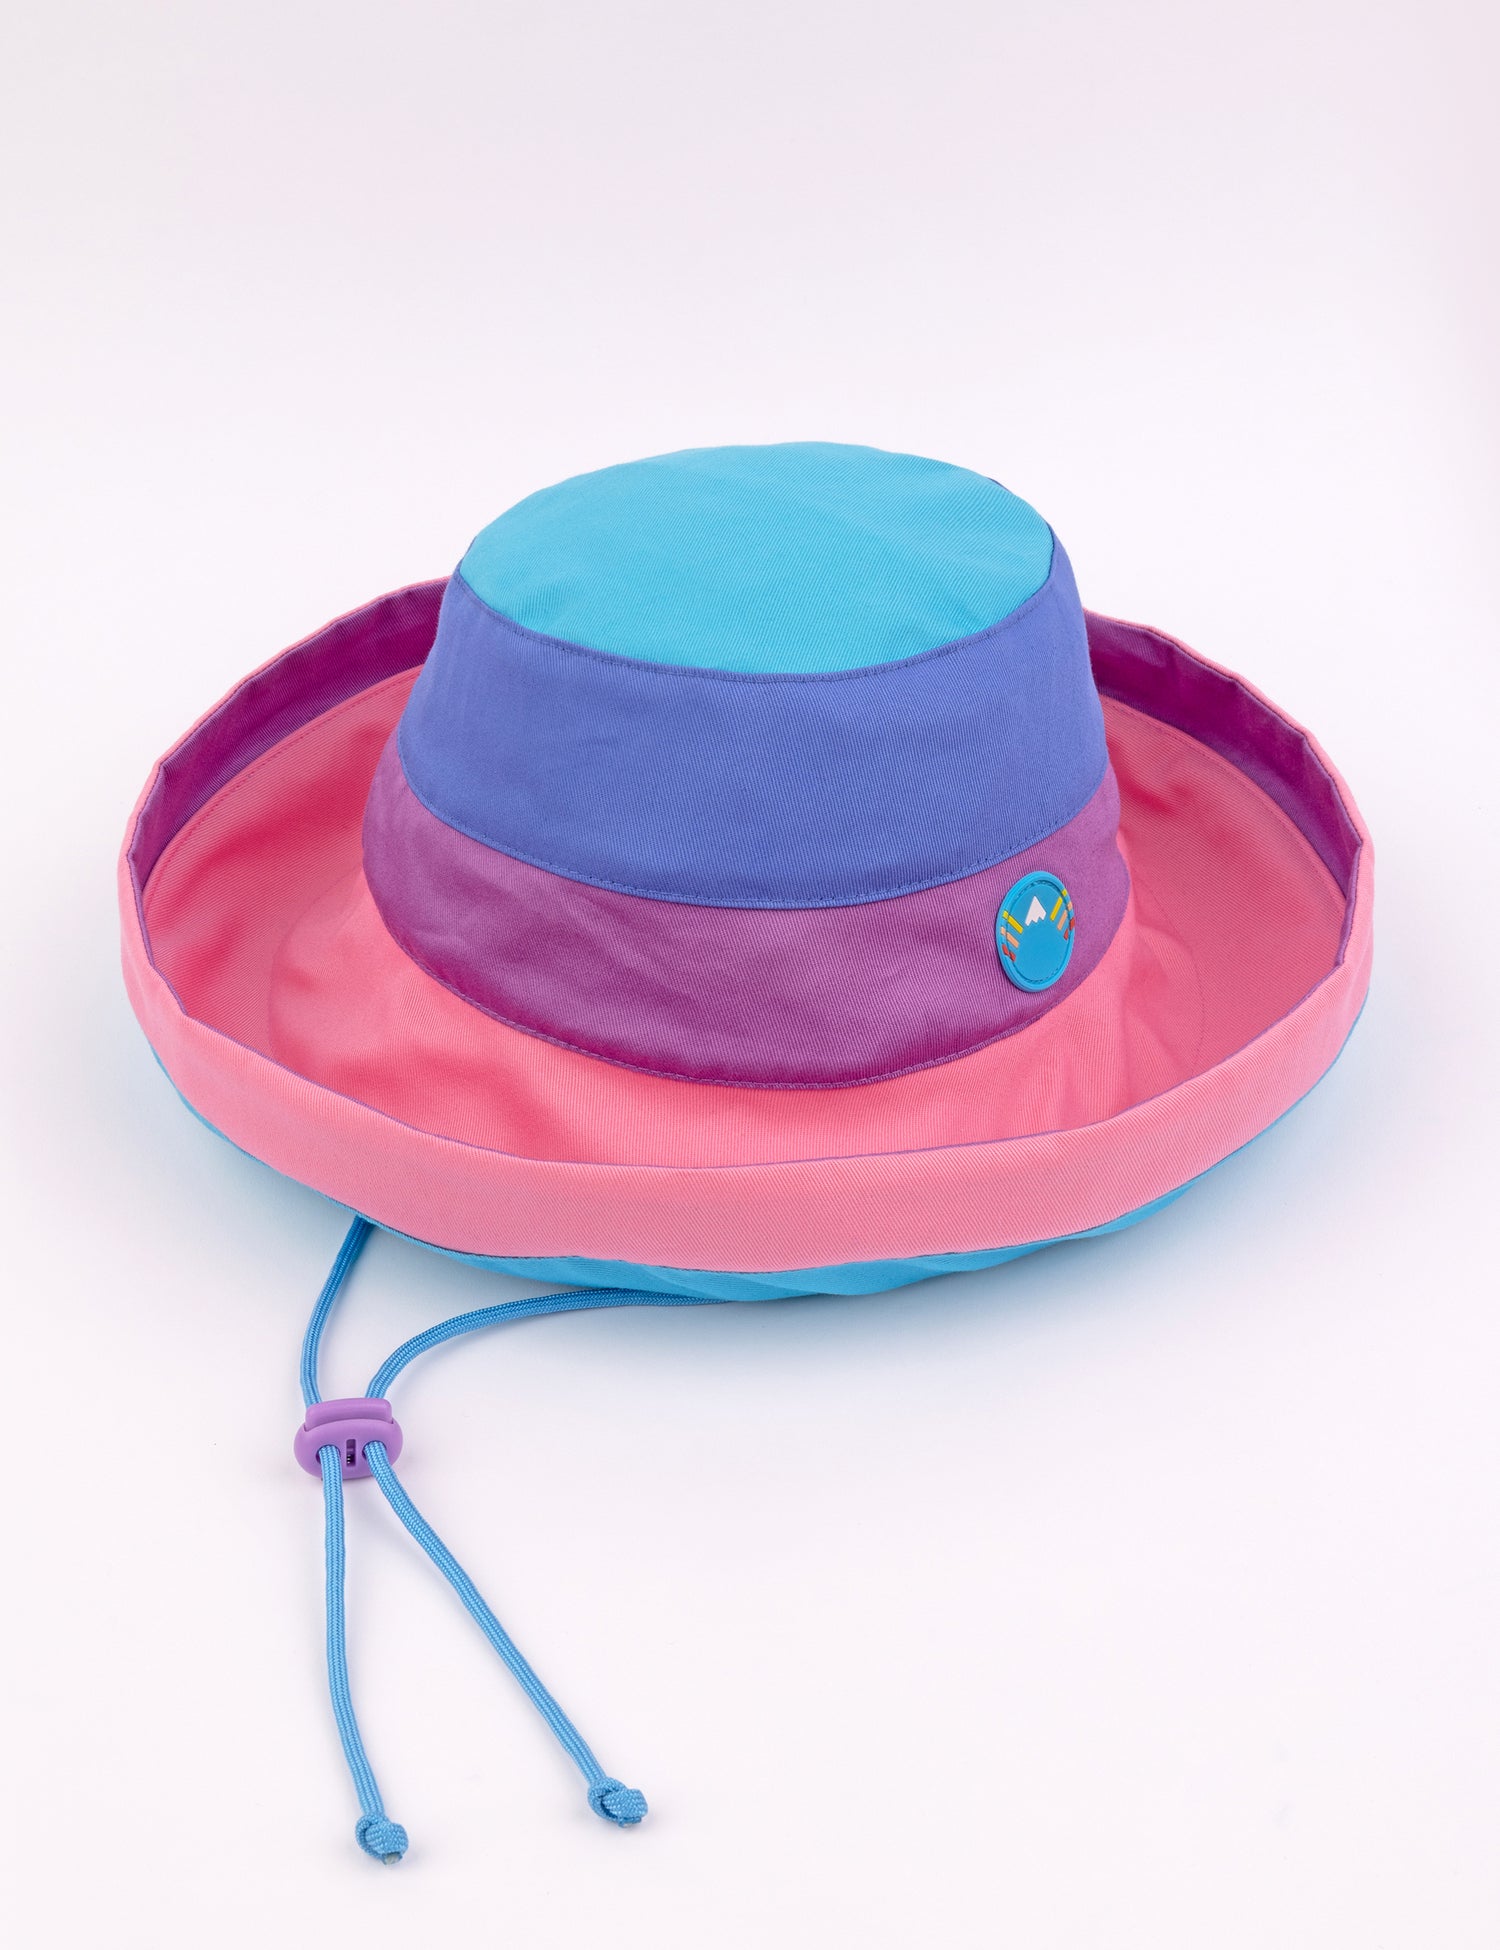 woman wearing a bucket style sunhat with blues and pinks.